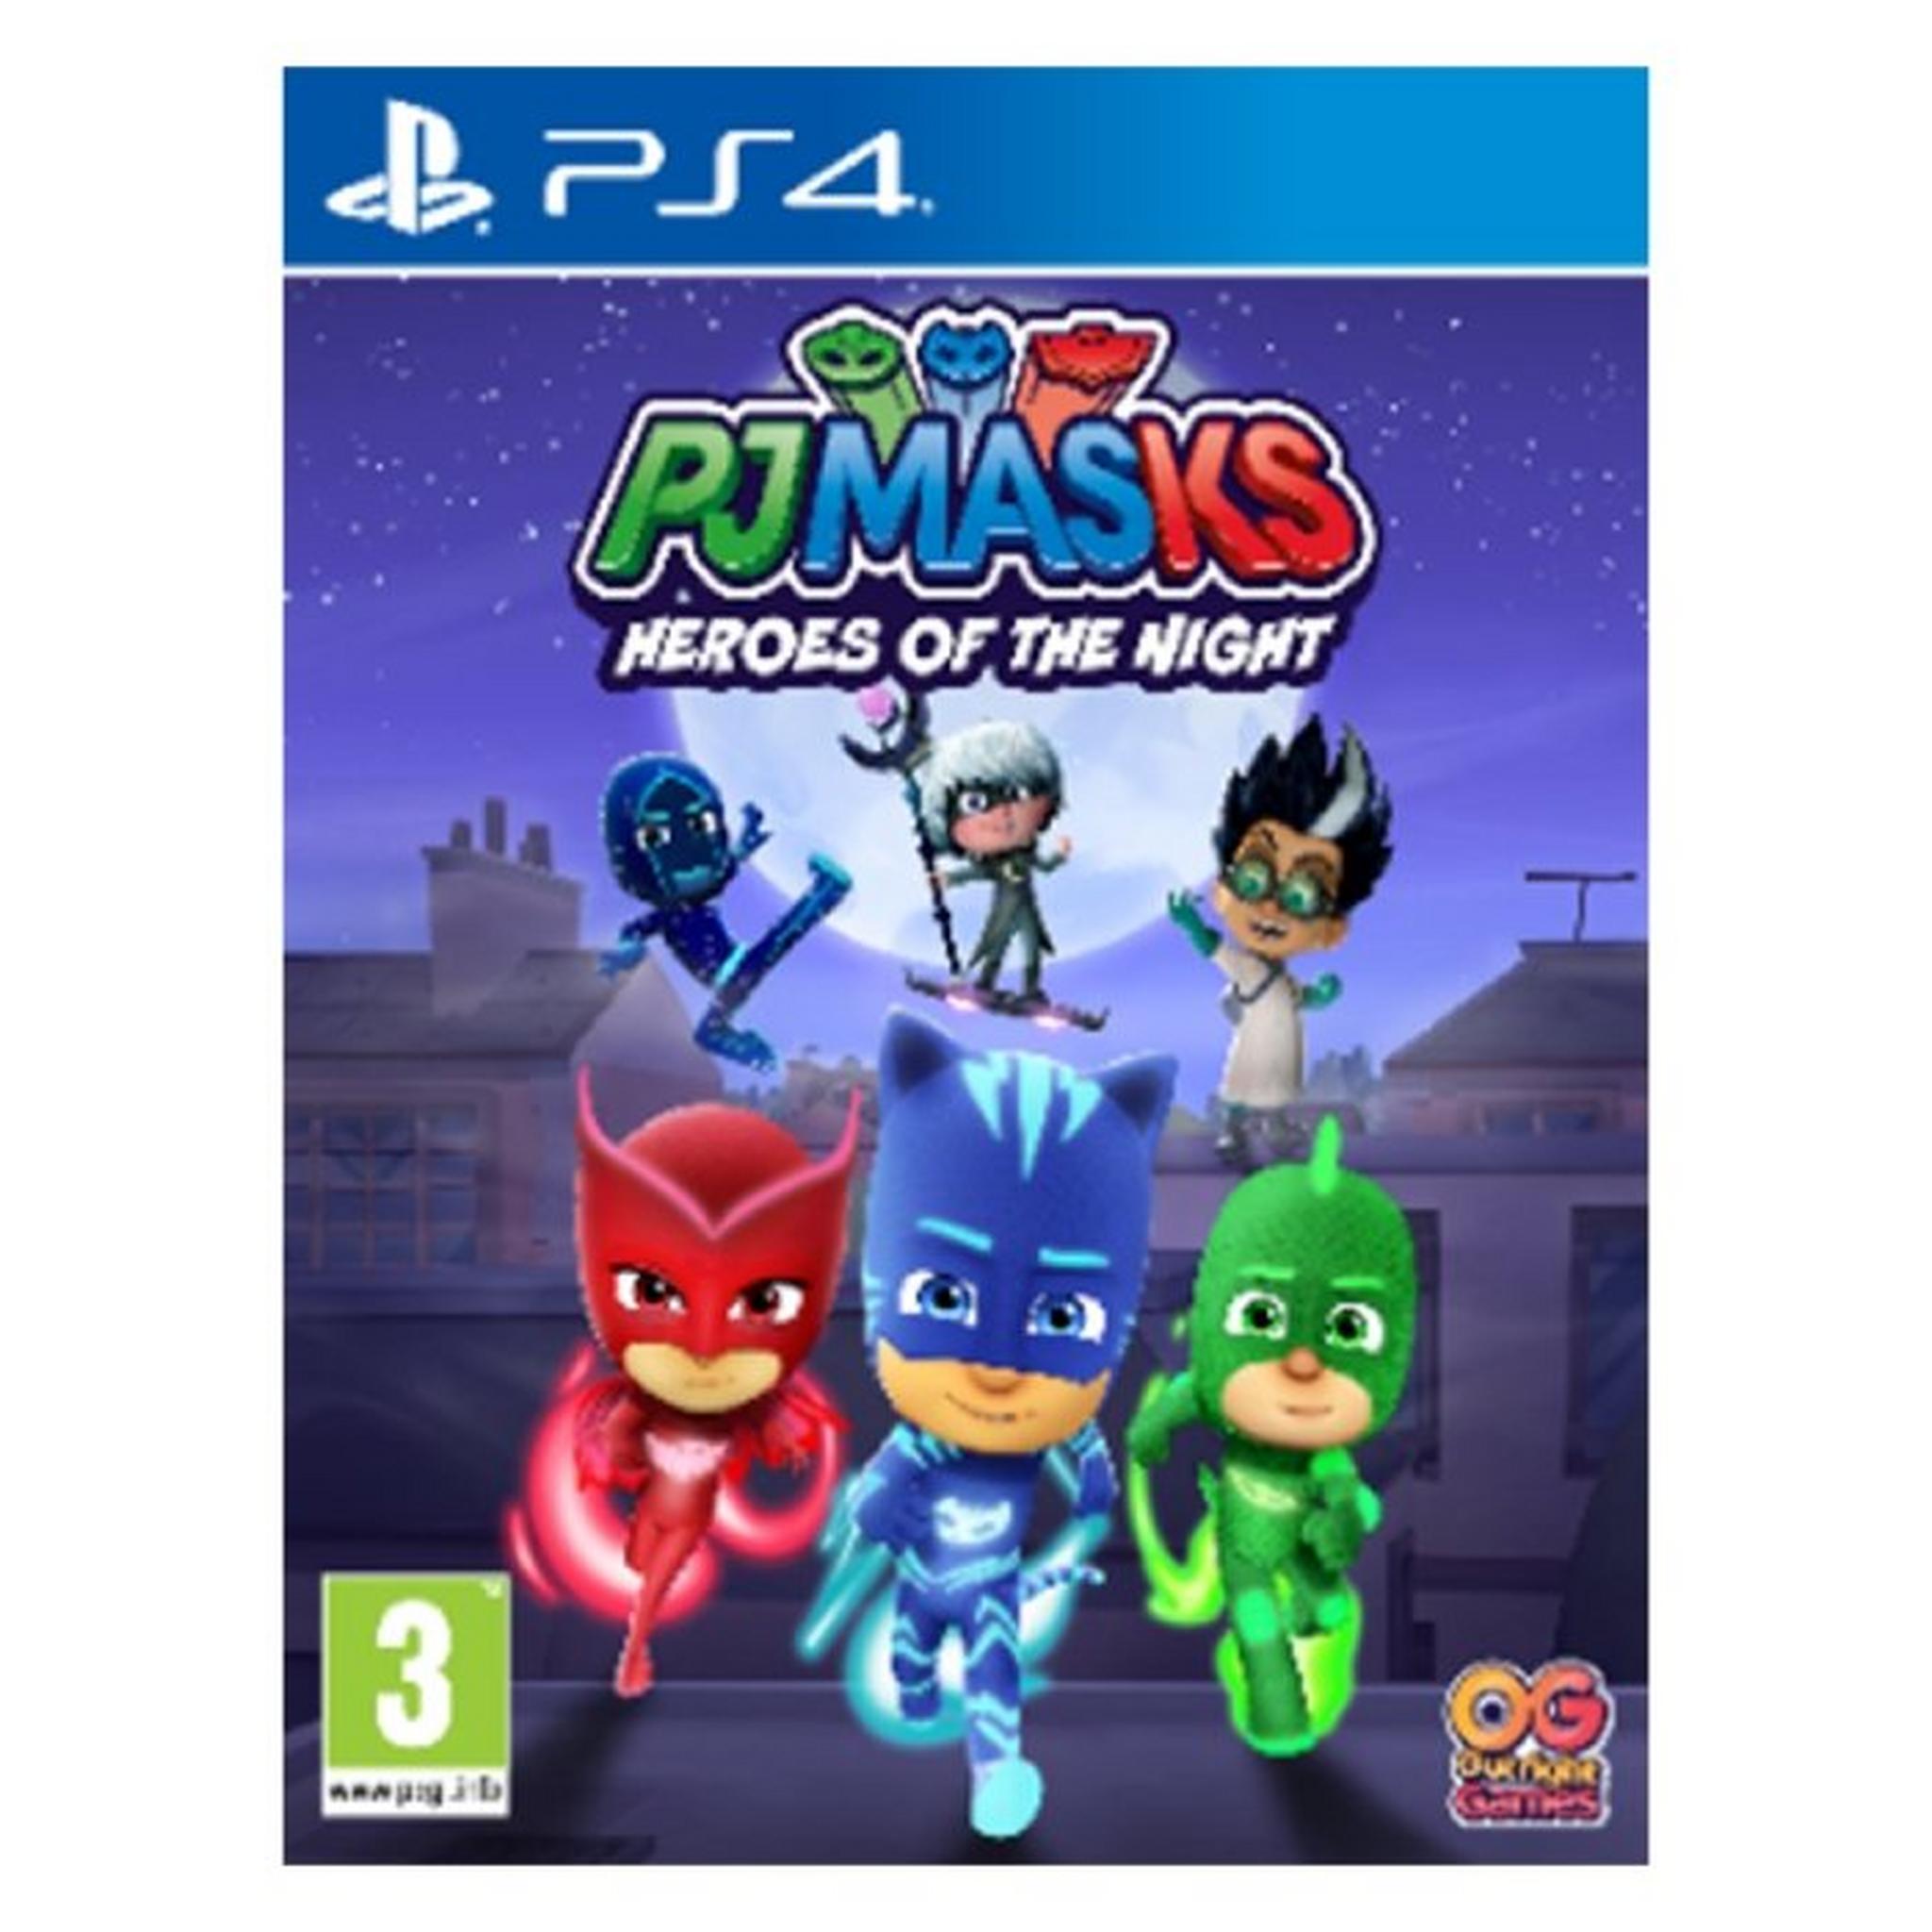 PJ Masks: Heroes of the Night - PlayStation 4 Game